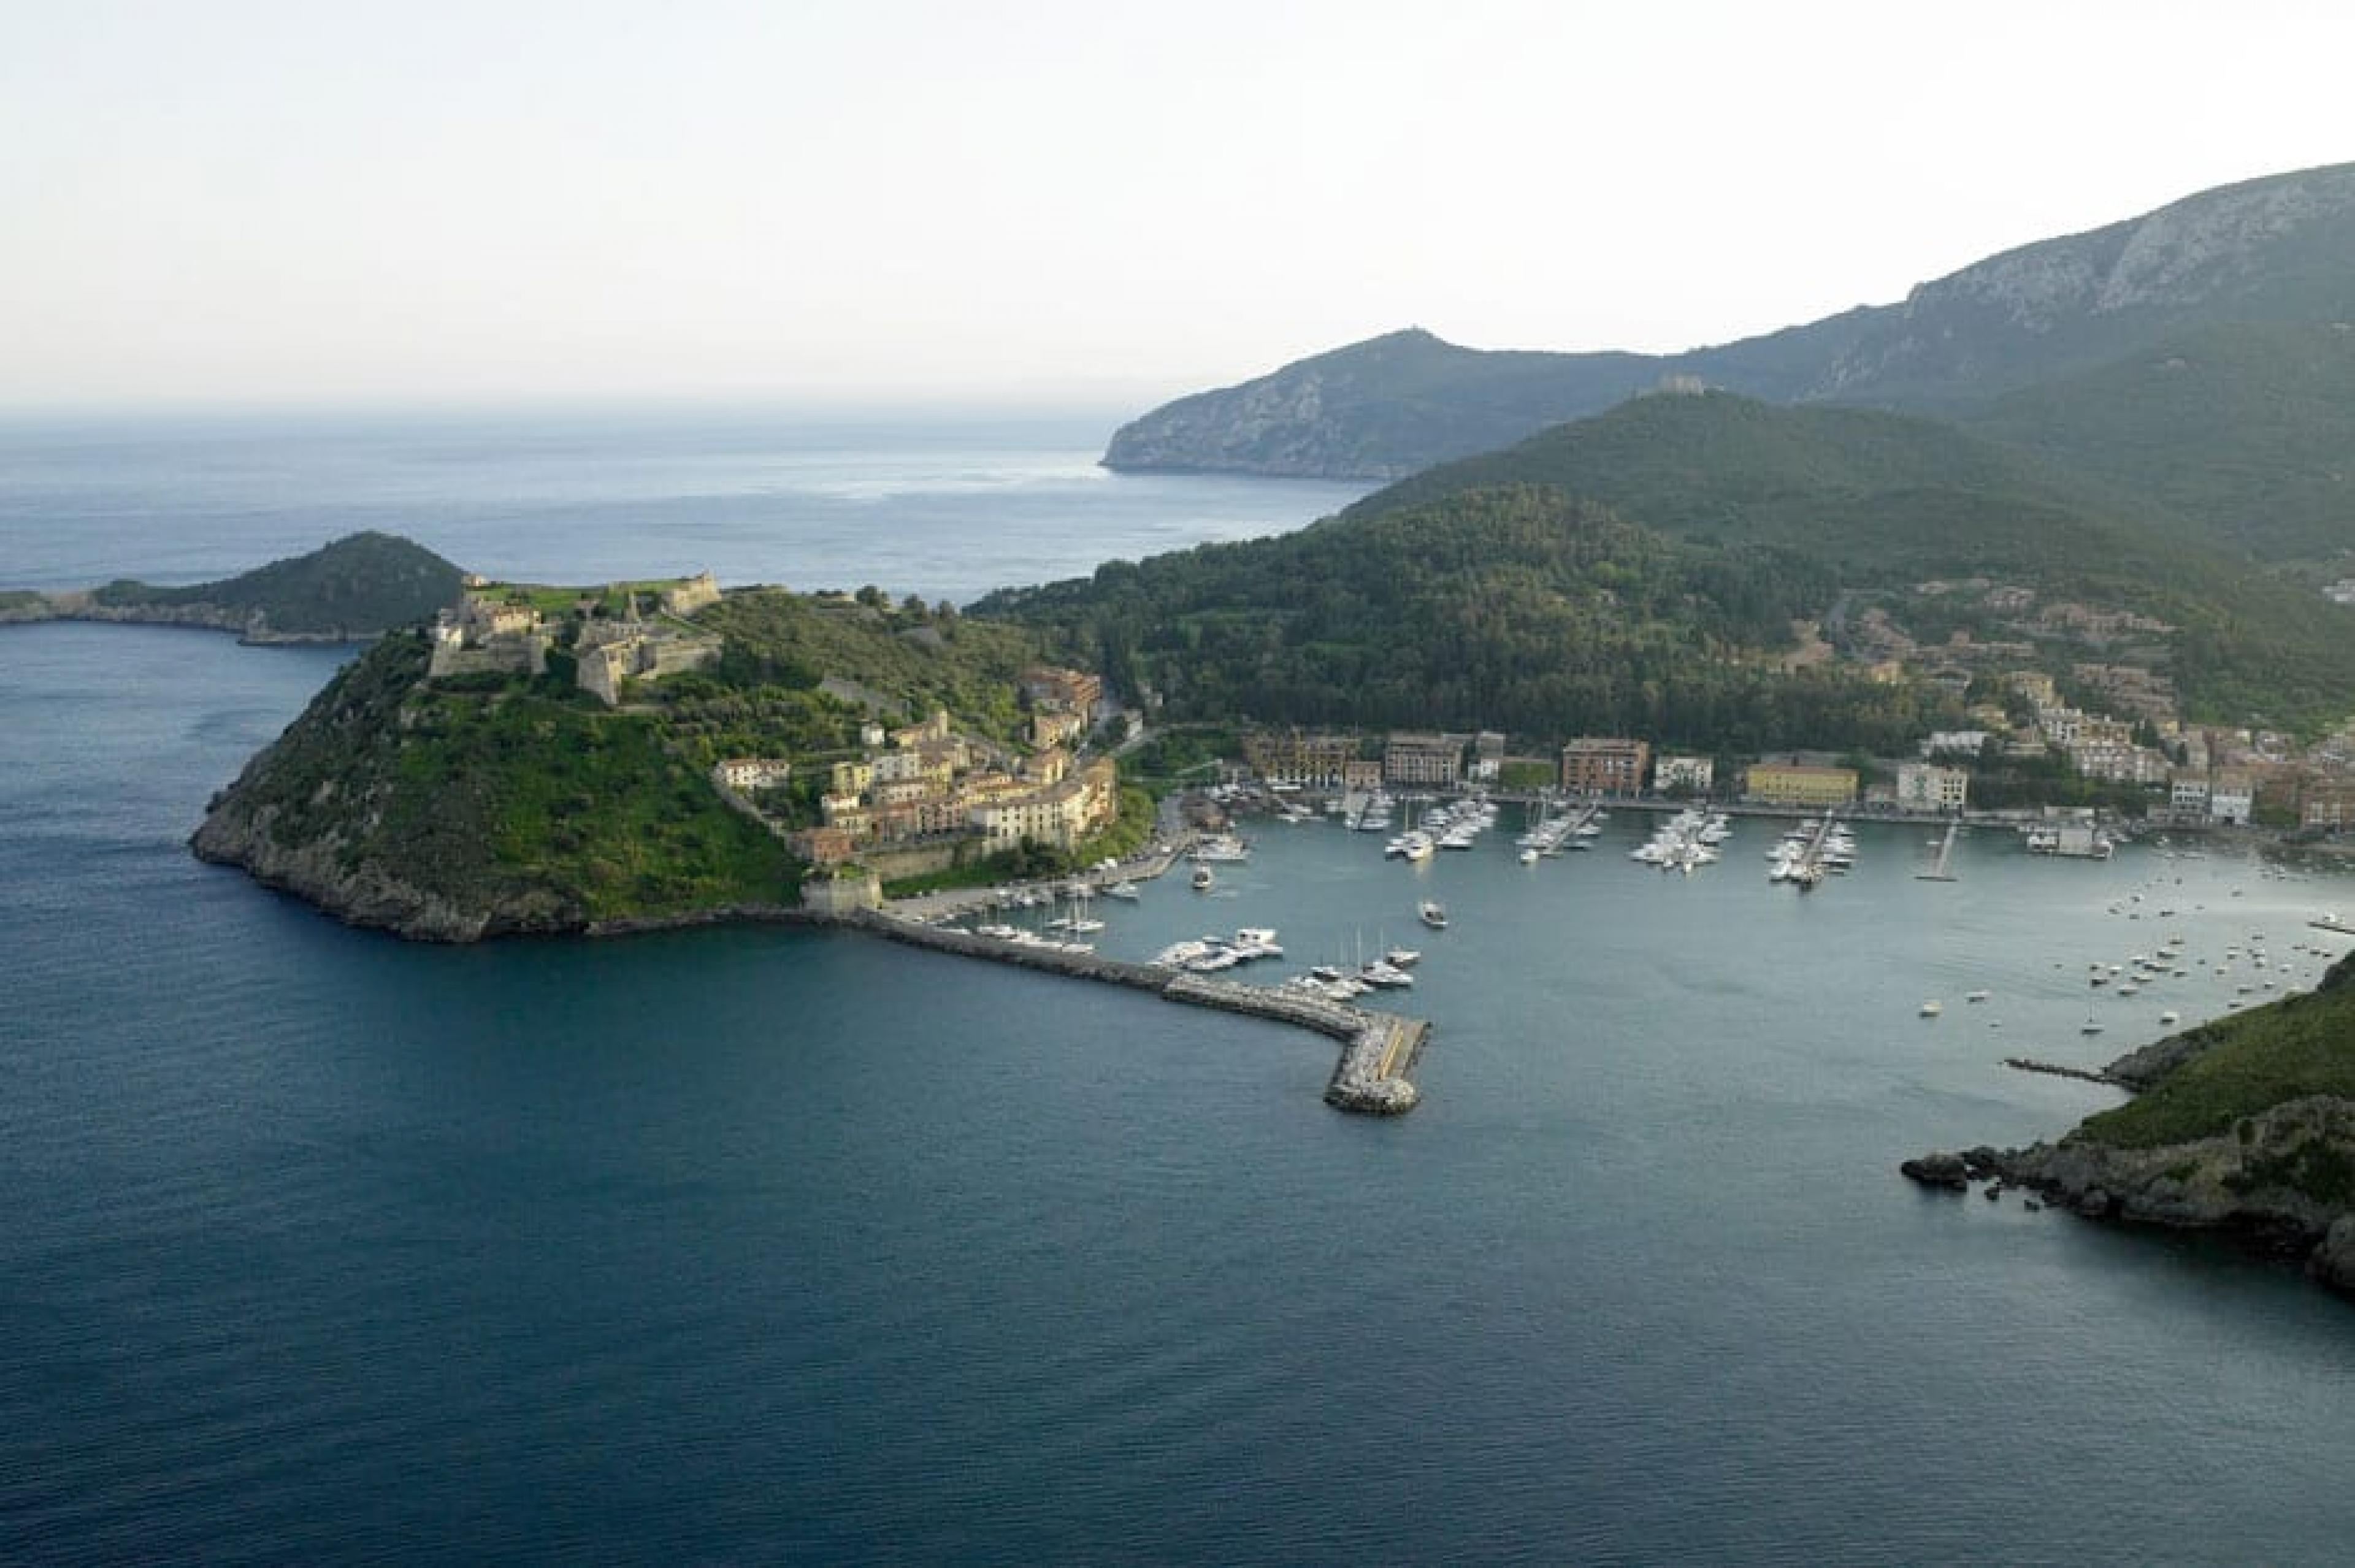 Aerial View - Indagare Tours: Boating from Porto Ercole to Porto Giglio, Tuscany, Italy